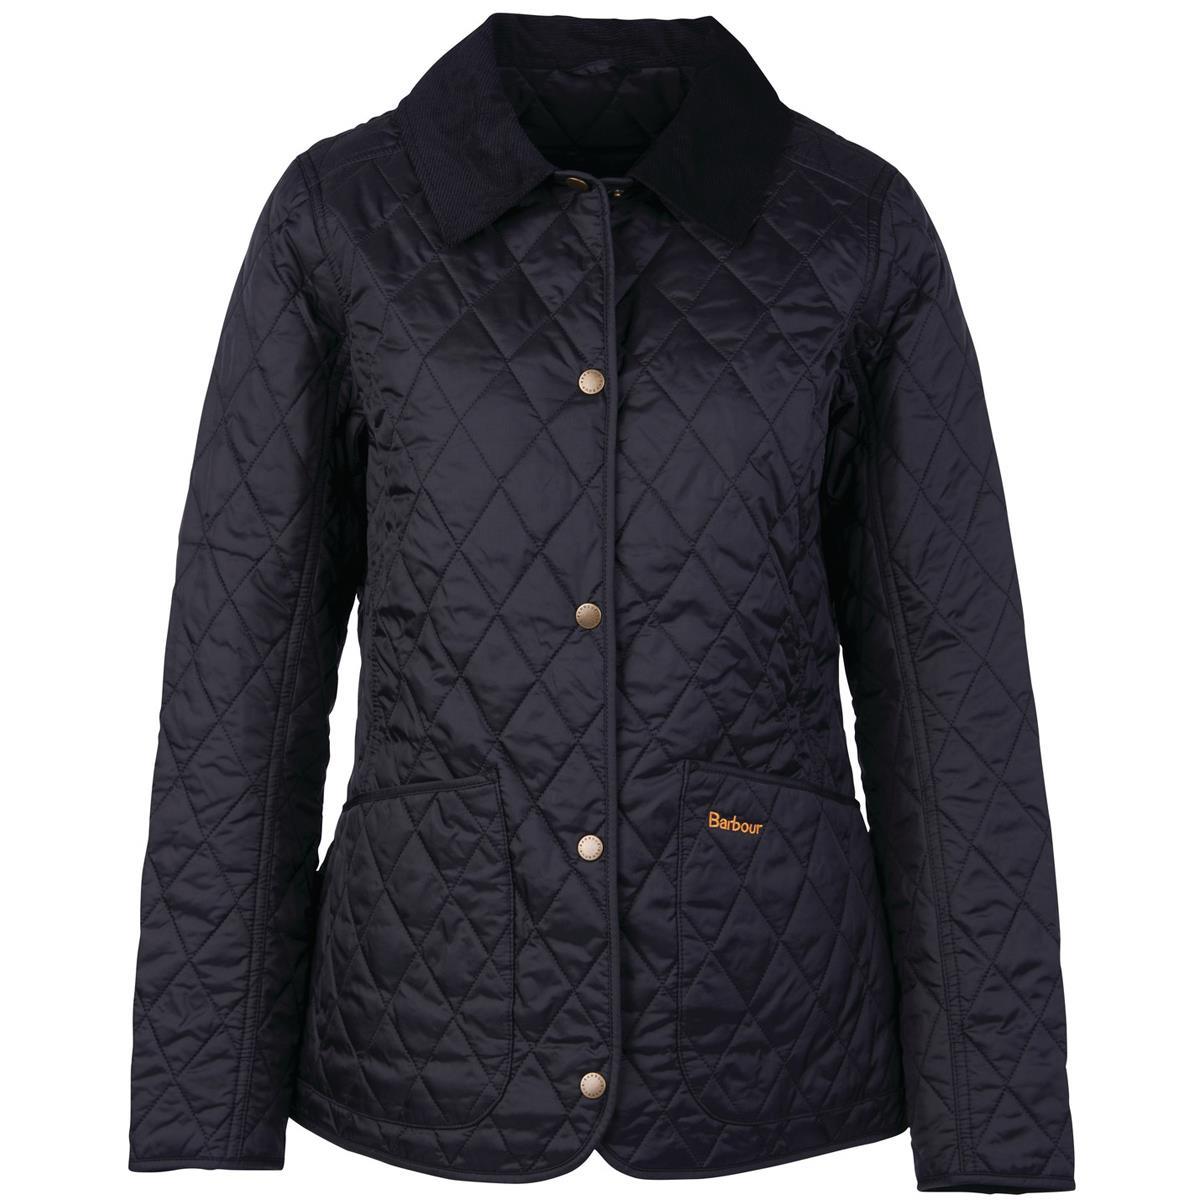 What are the materials in the Barbour Annandale Quilted Jacket?